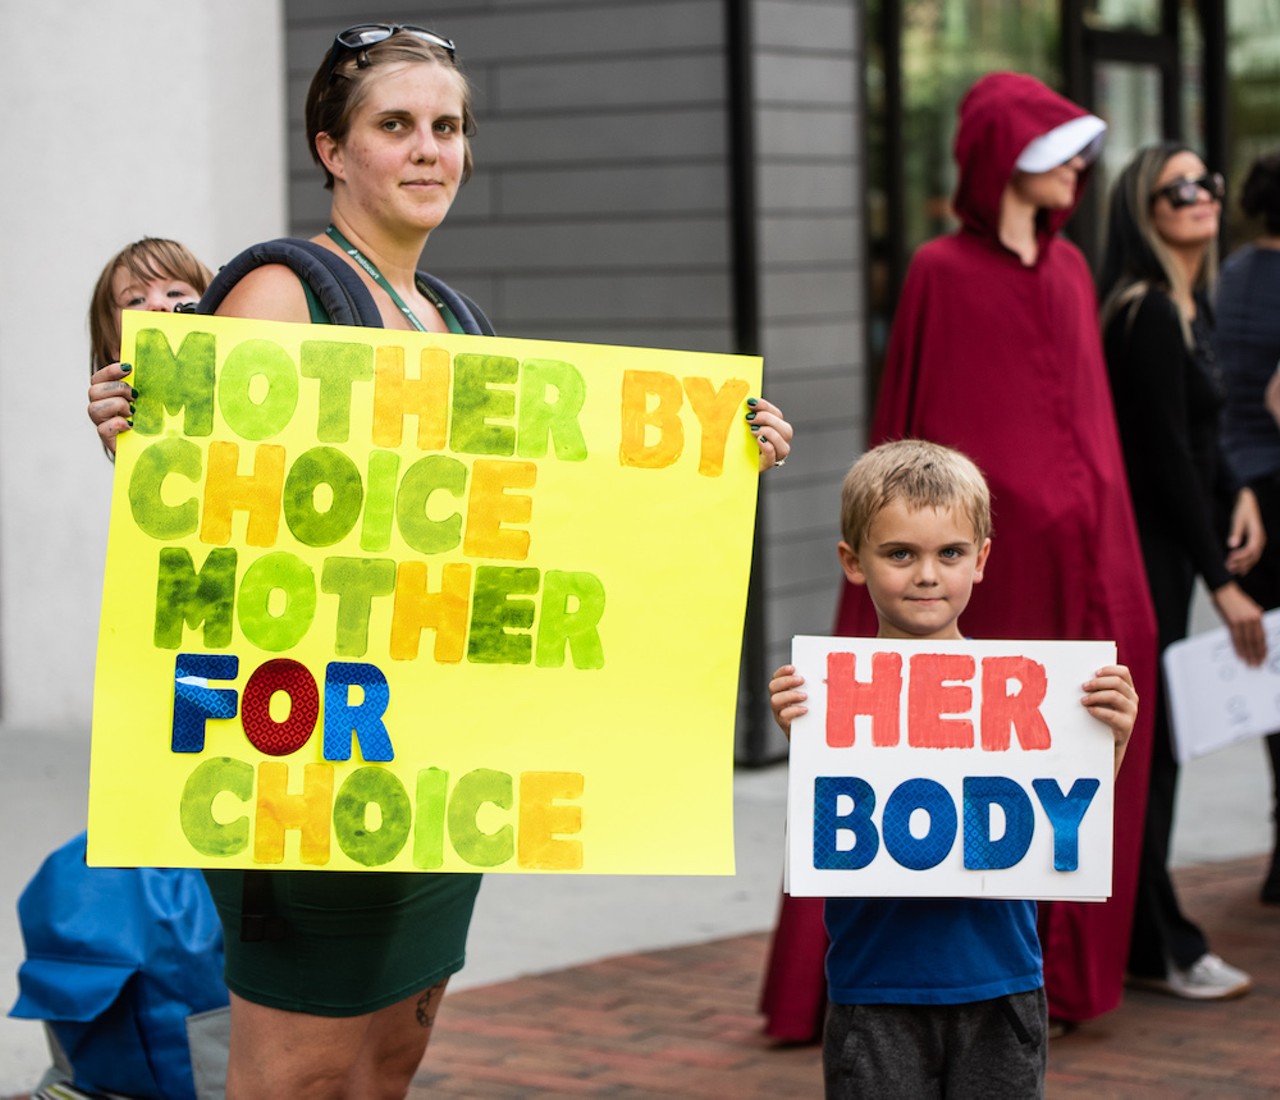 Orlando rallied for abortion rights downtown Monday in wake of Supreme Court overturning 'Roe v. wade'